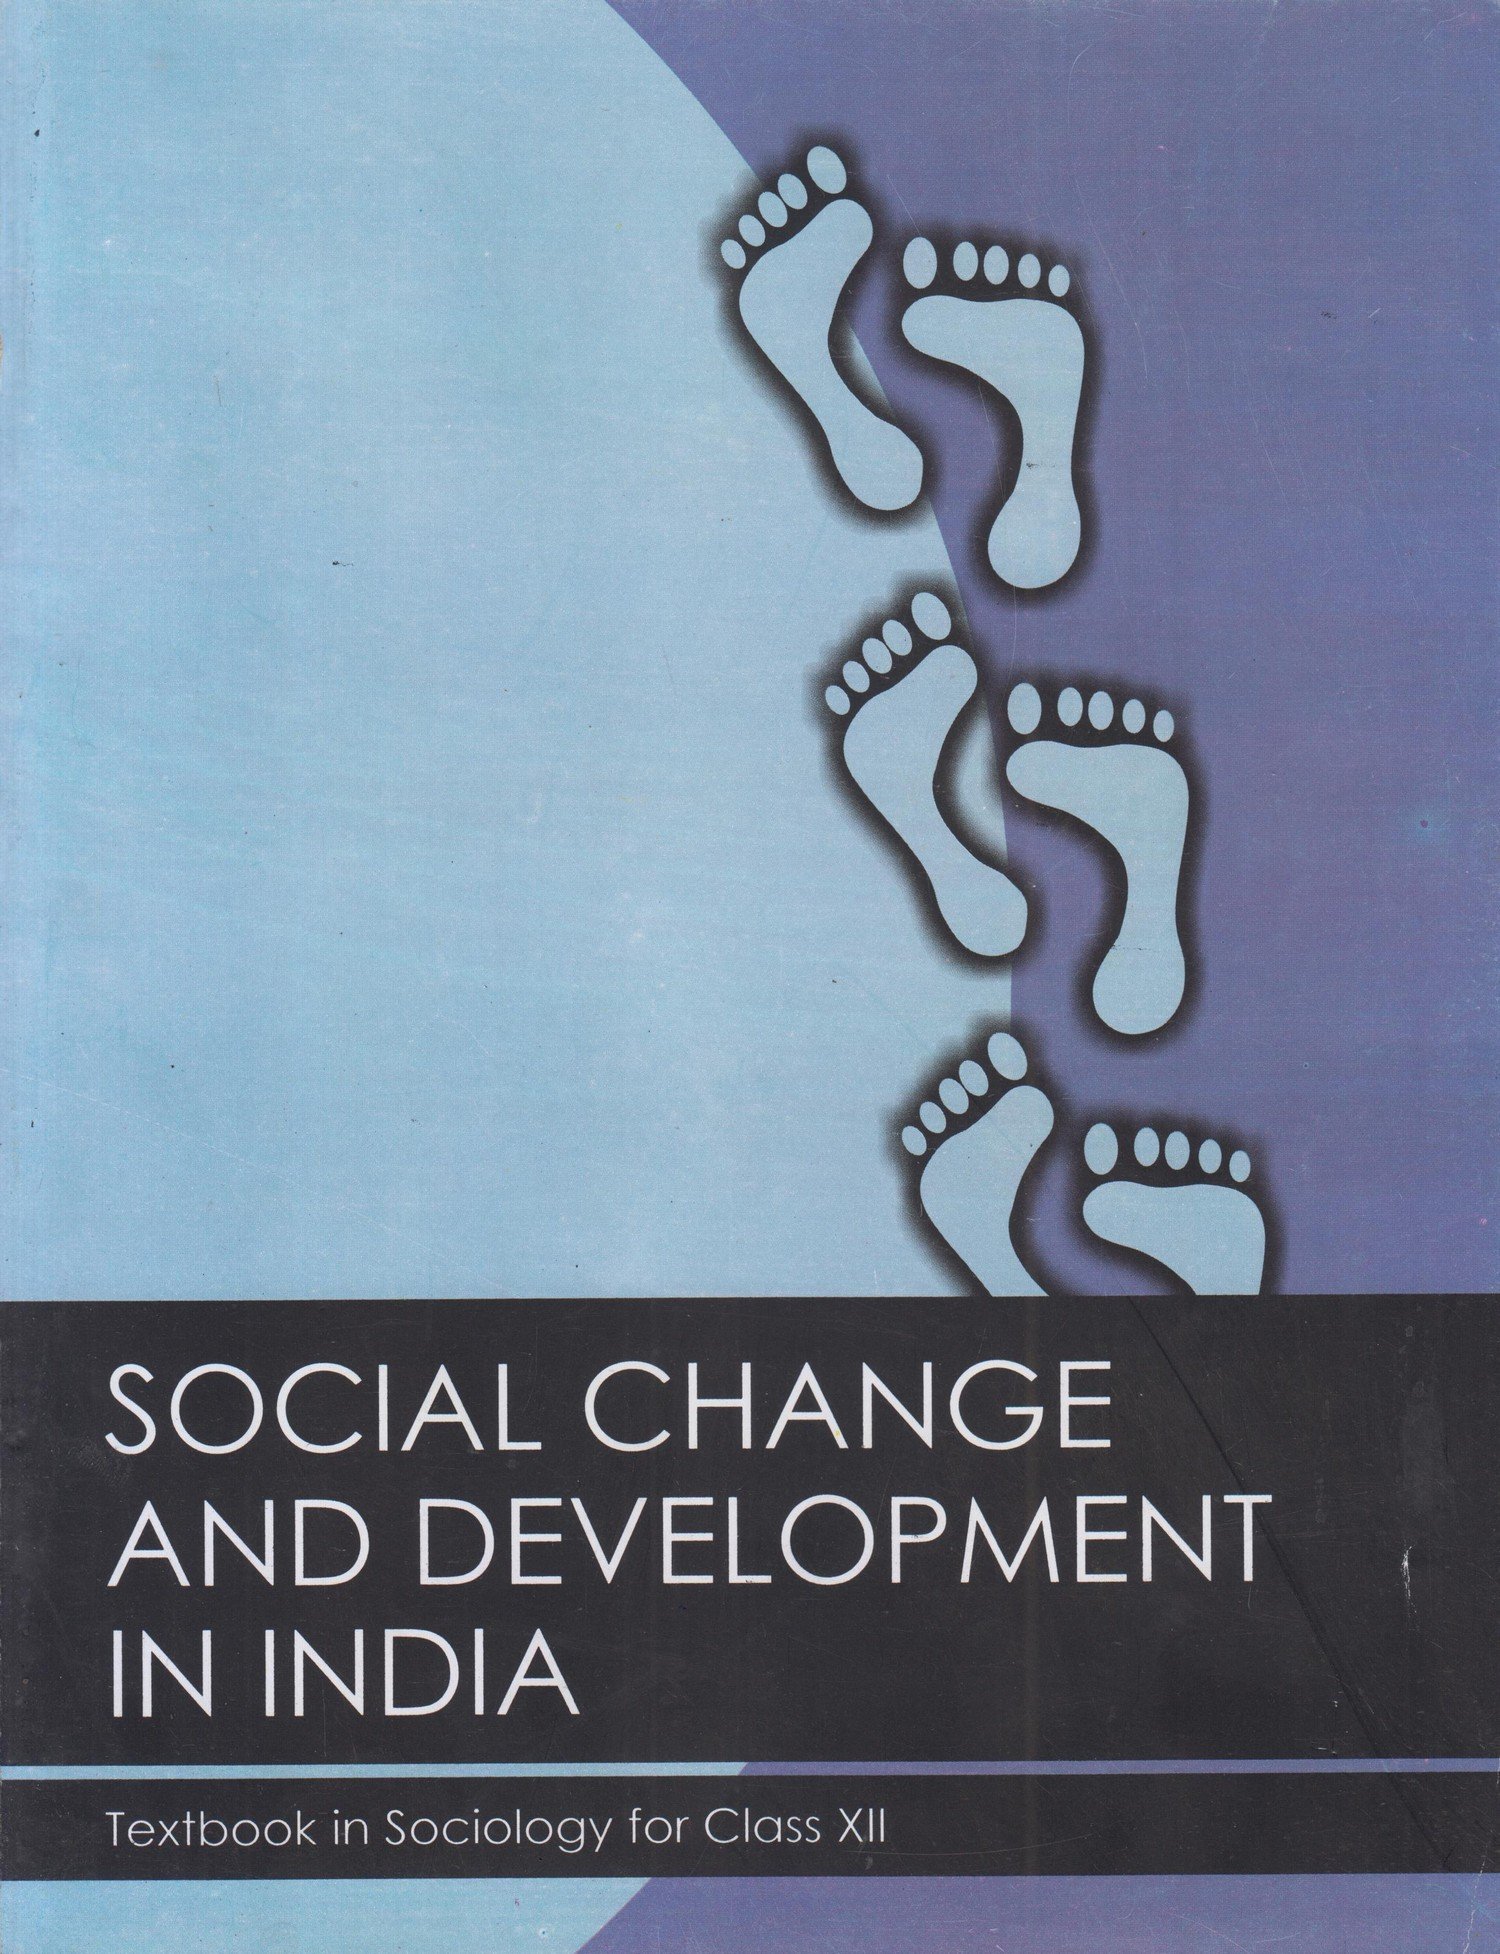 Sociology book for upsc